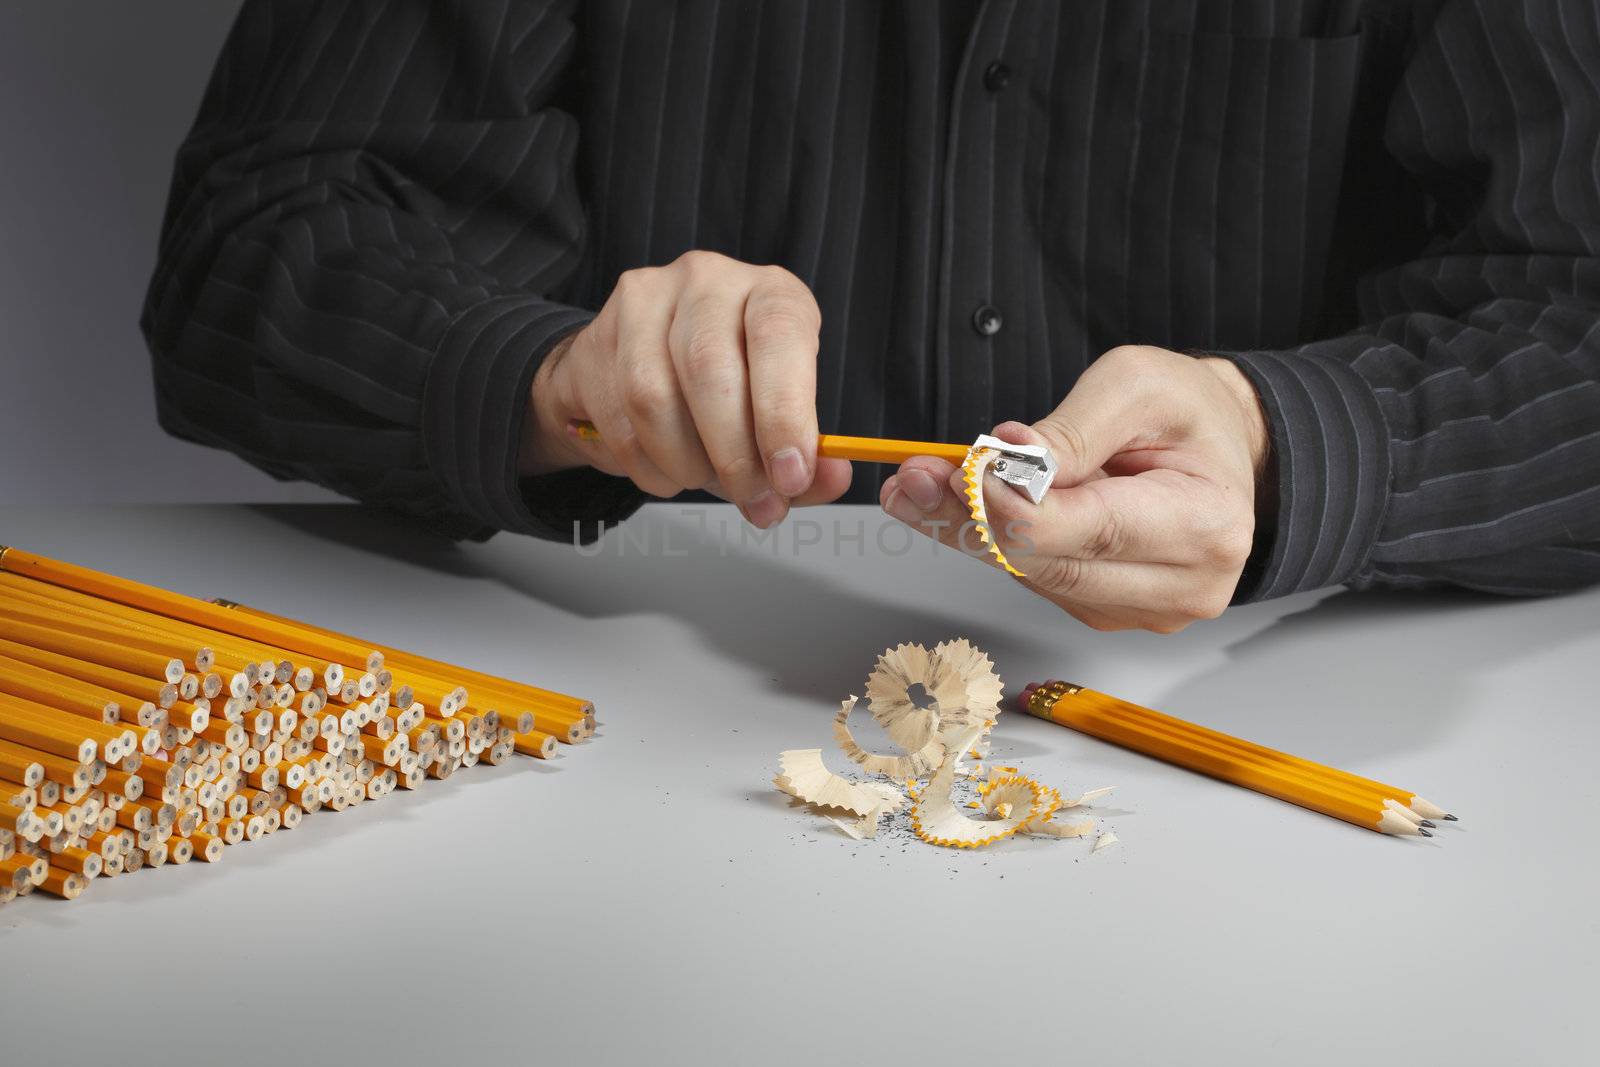 Man sharpening a heap of pencils with a pencil sharpener.